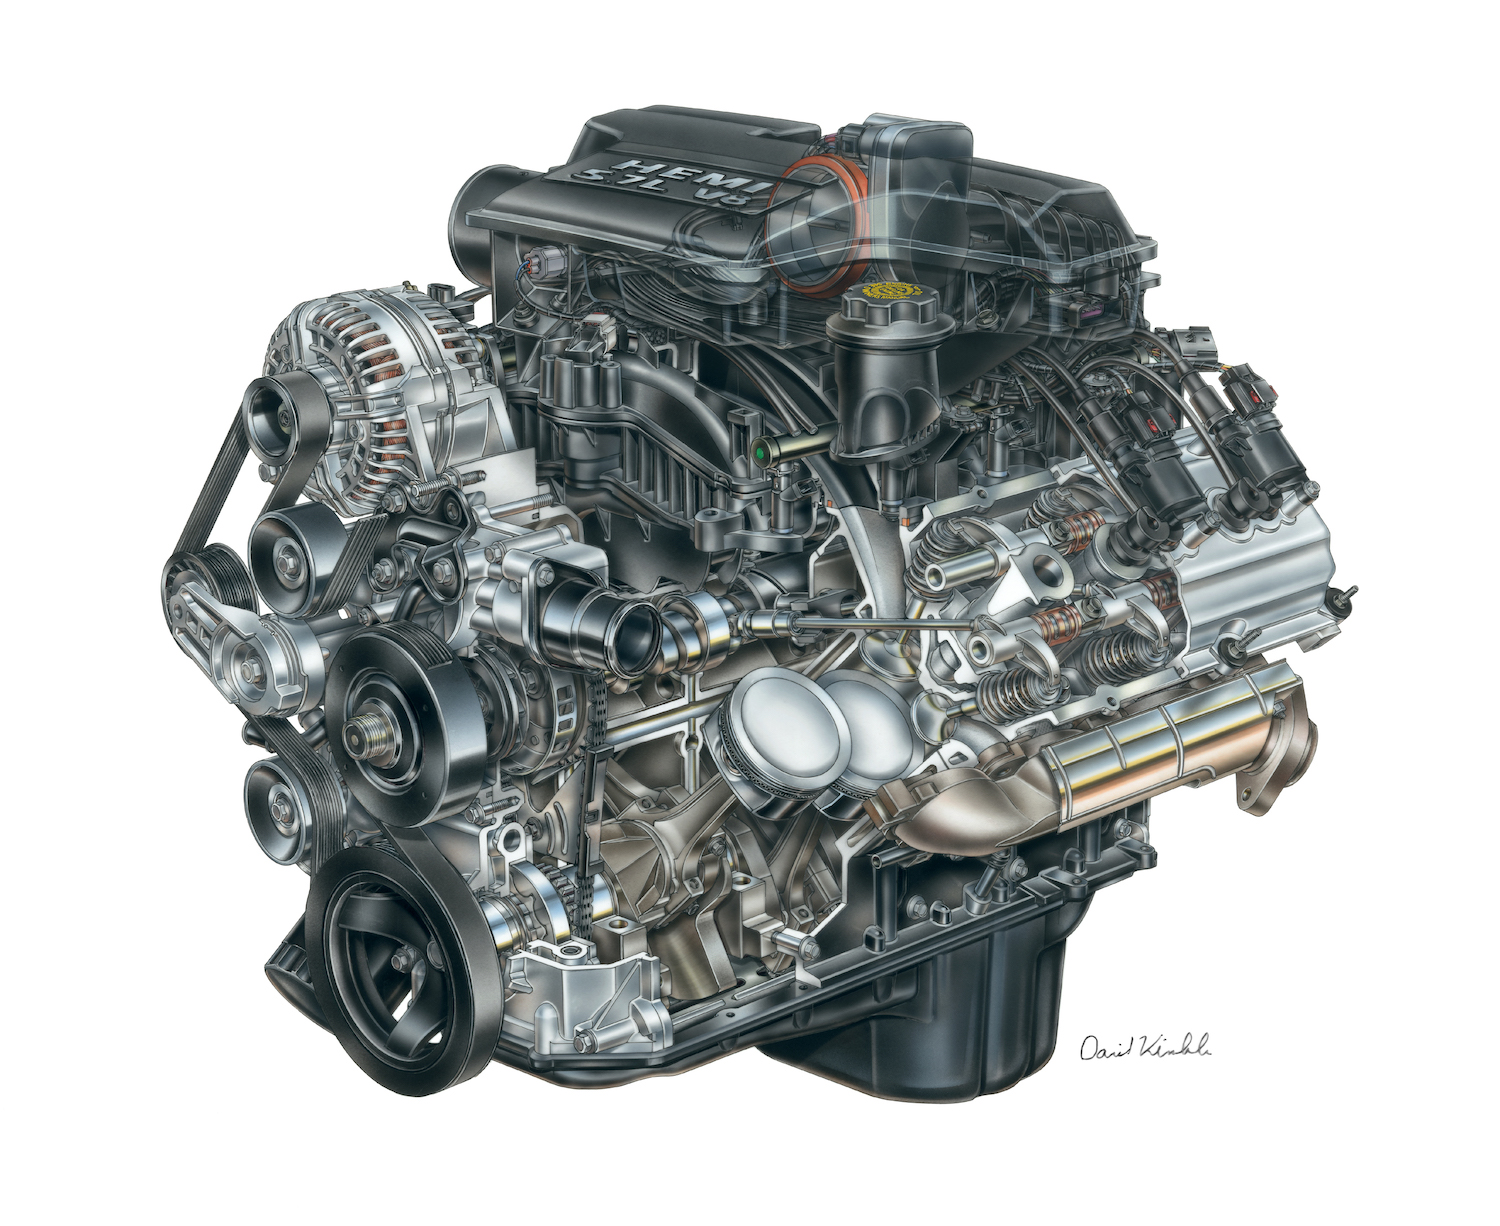 Hand-drawn cutout of the 5.7-liter Hemi V8 engine from a Ram truck published by Dodge & Stilants.